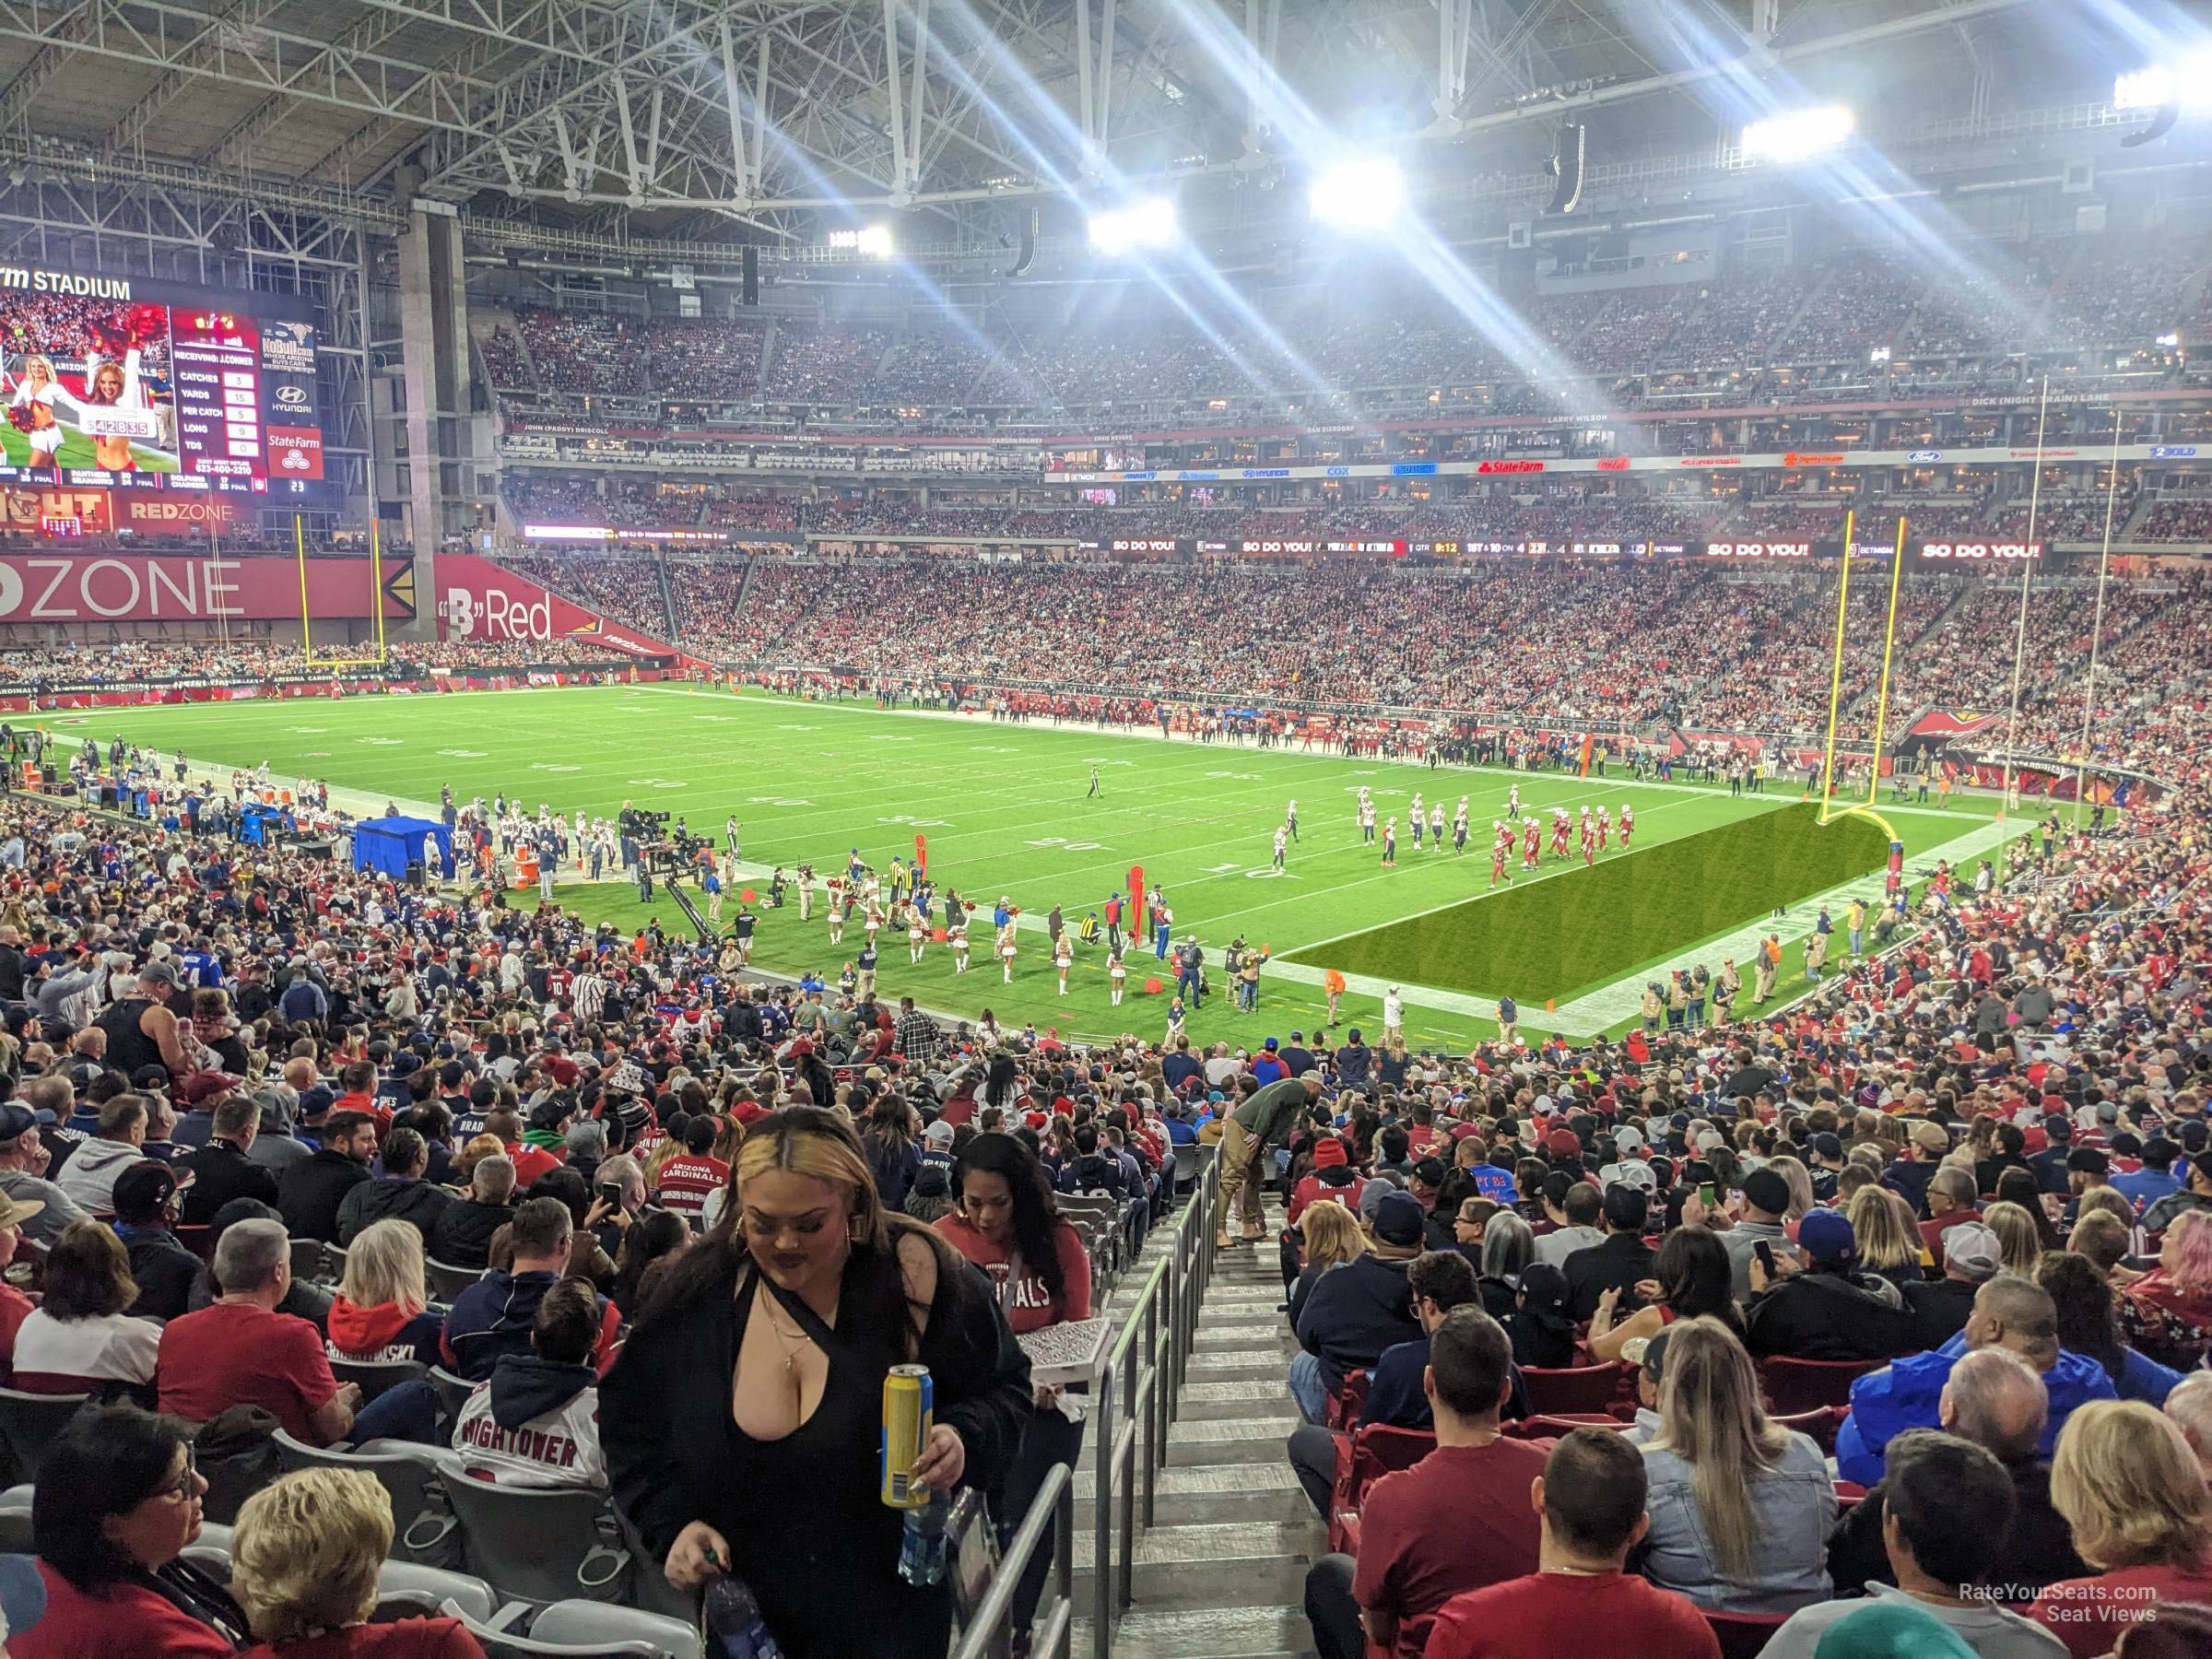 section 124, row 41 seat view  for football - state farm stadium